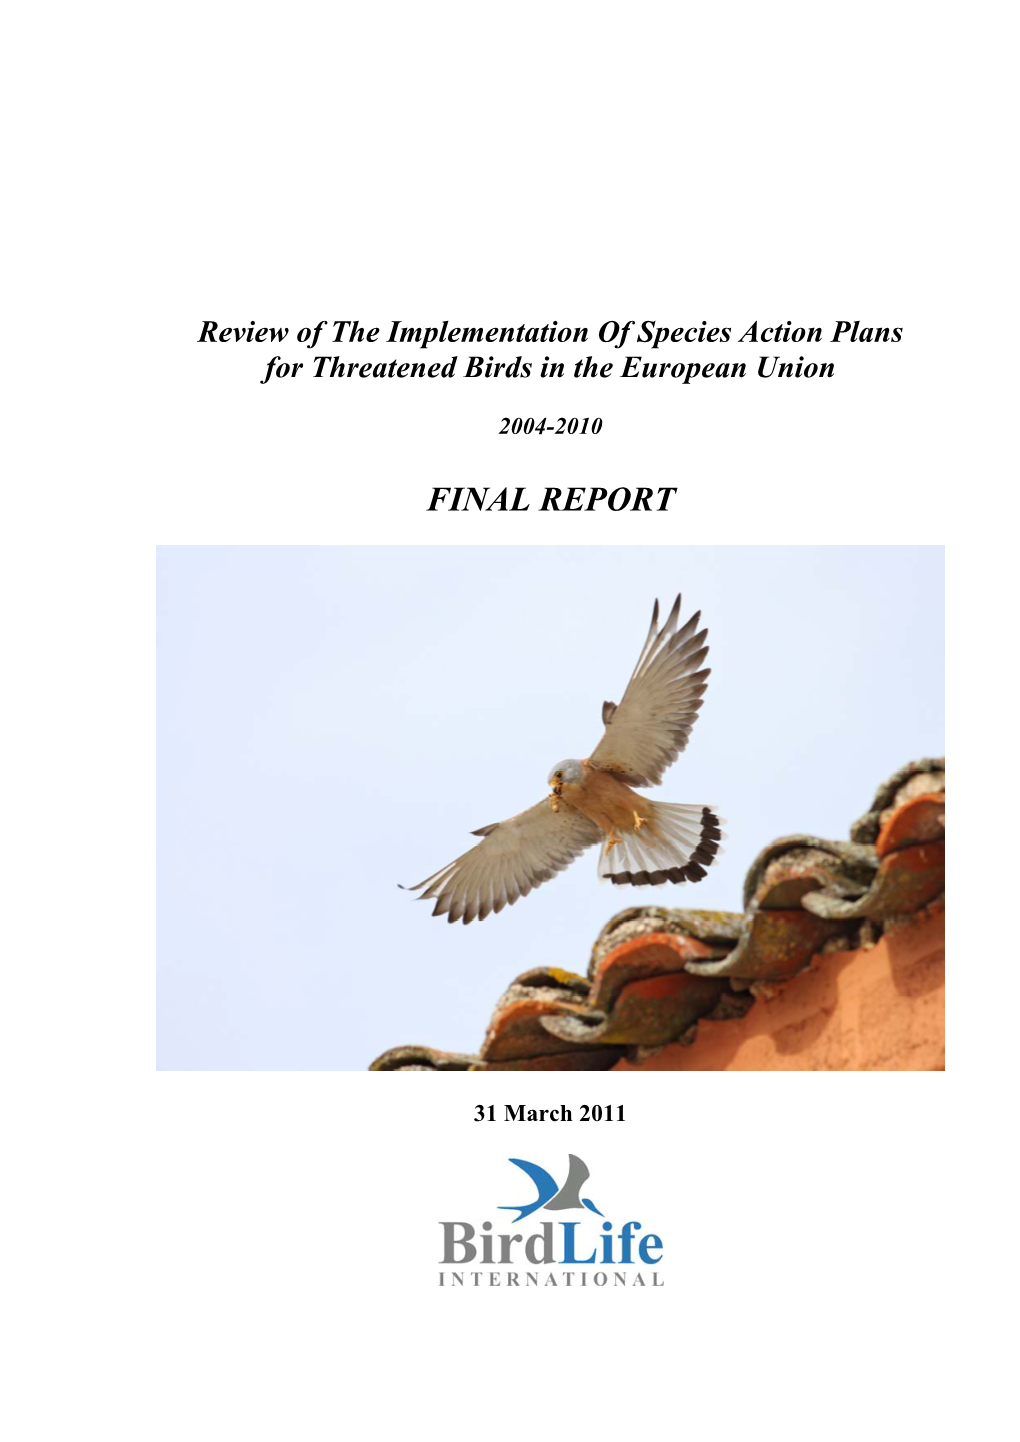 Review of the Implementation of Species Action Plans for Threatened Birds in the European Union